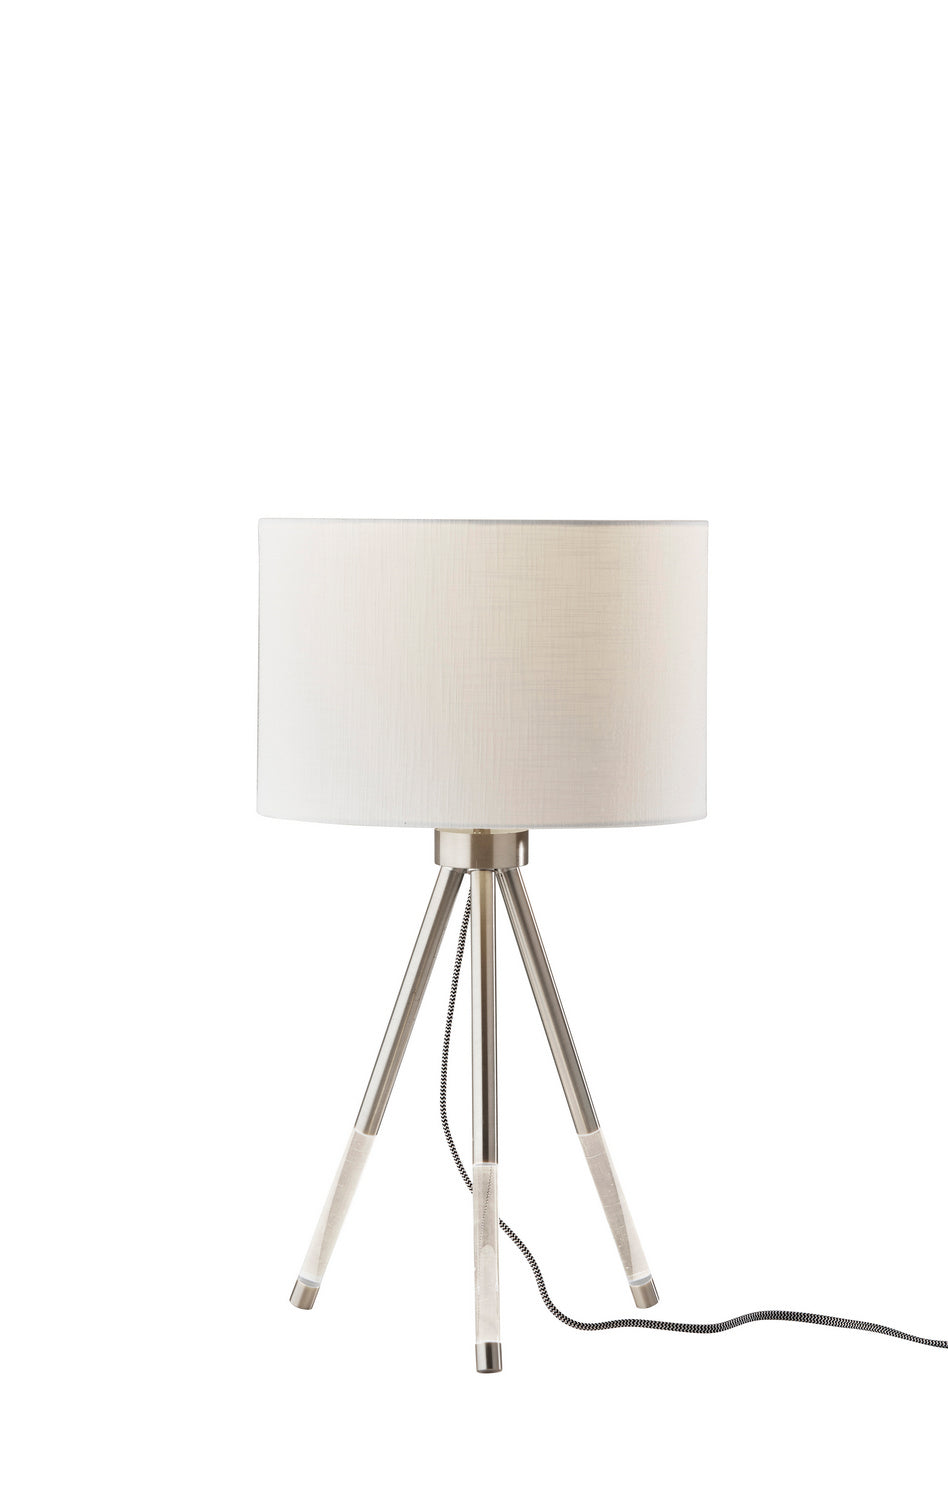 Adesso Home 3548-22  Della Lamp Brushed Steel W. Clear Acrylic Light Up Legs